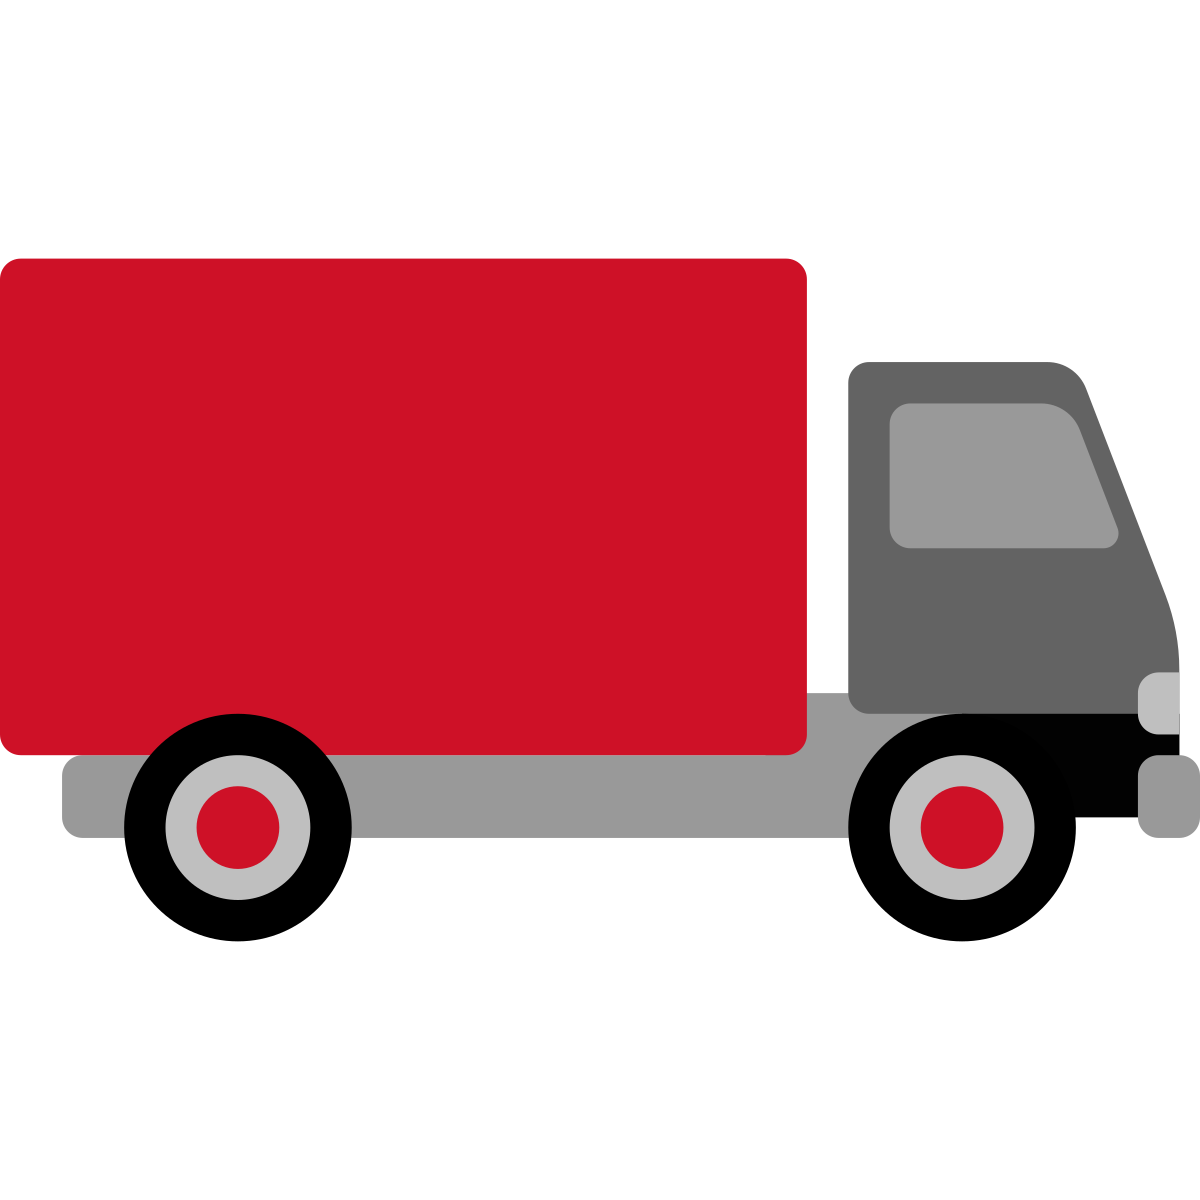 Download File Delivery Truck Svg Wikimedia Commons